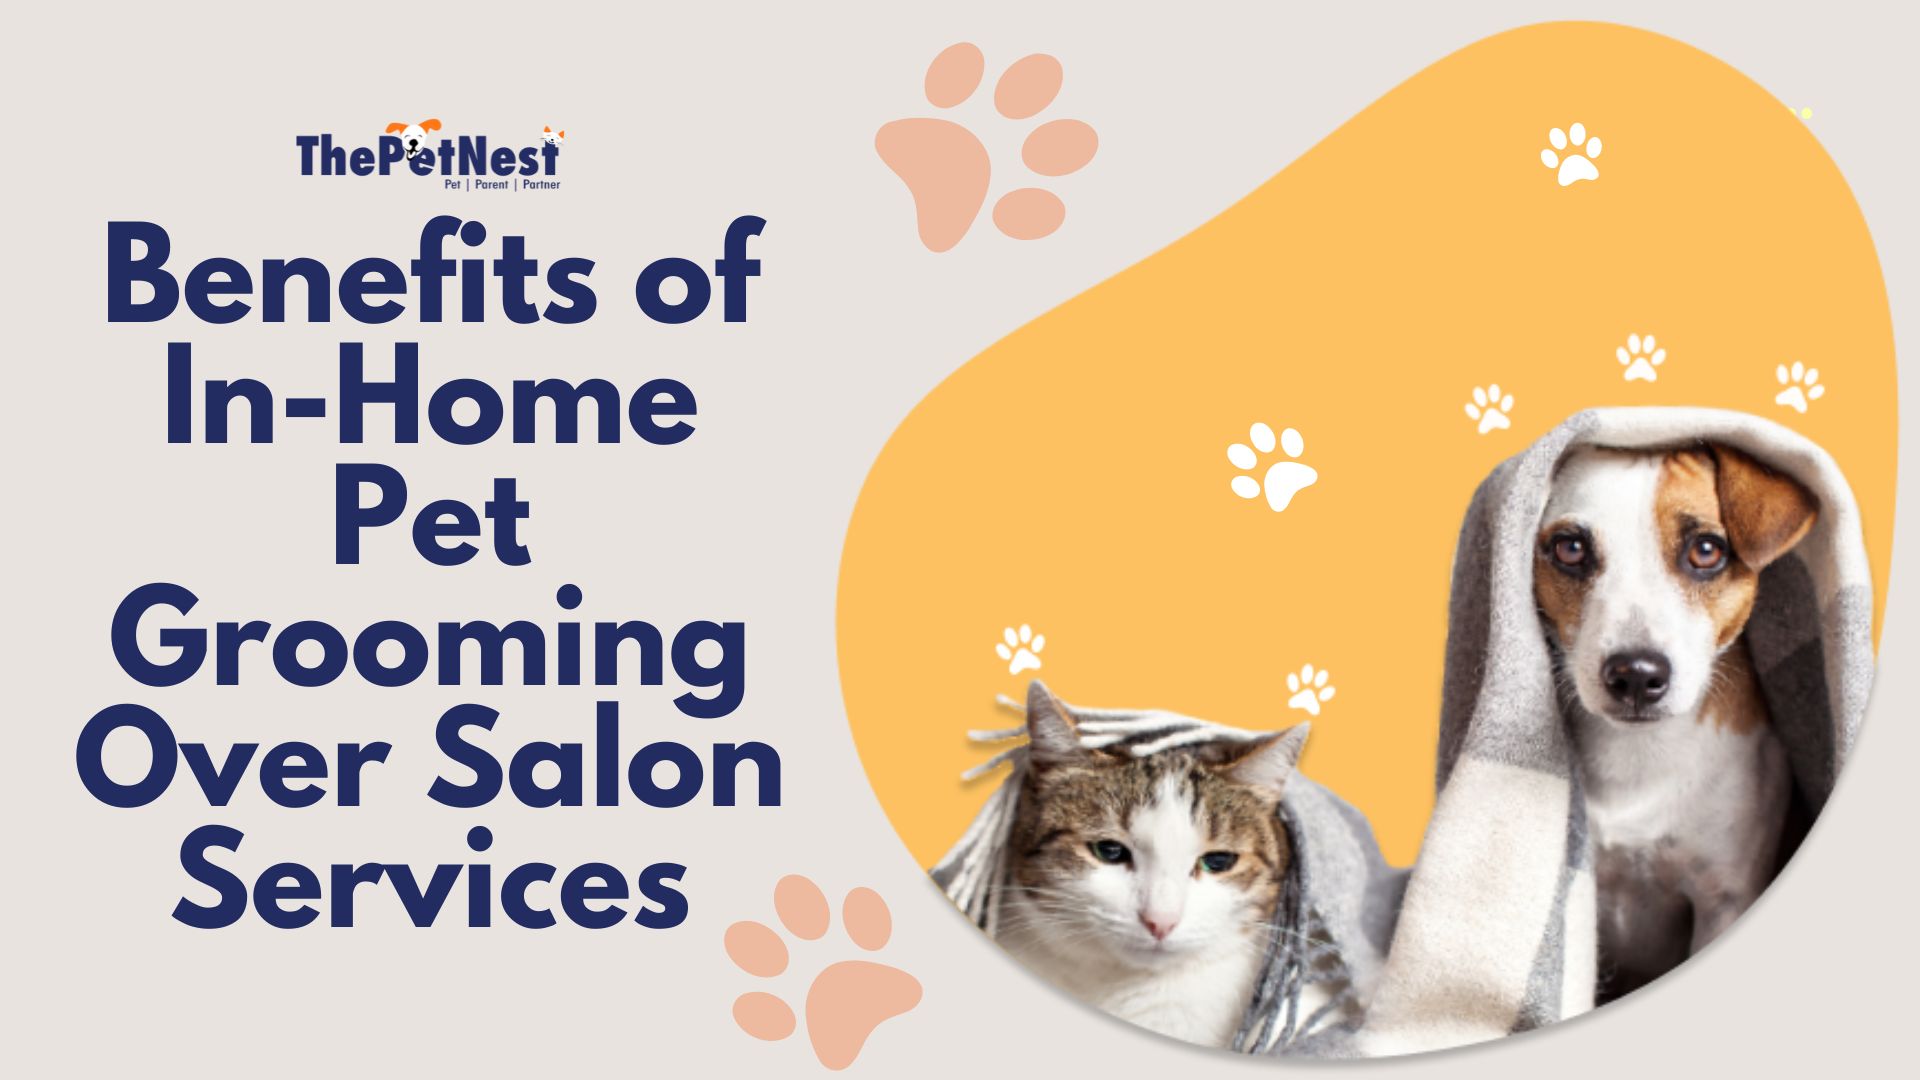 The Benefits of In-Home Pet Grooming Over Salon Services